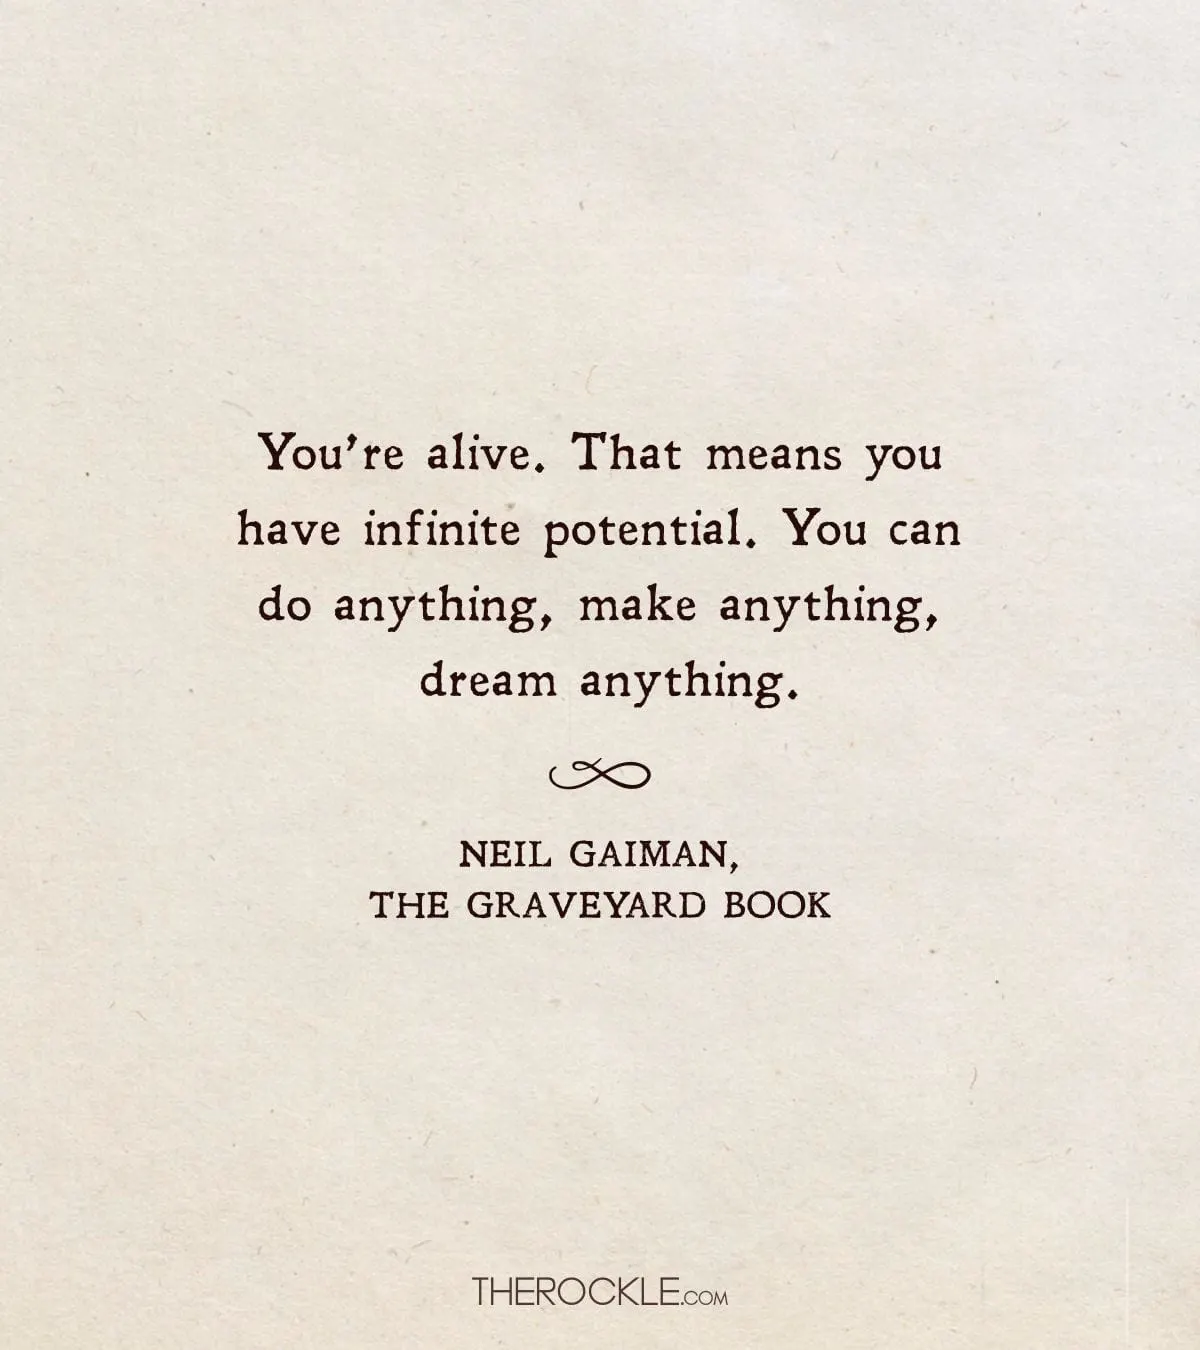 Neil Gaiman's quote on potential in life